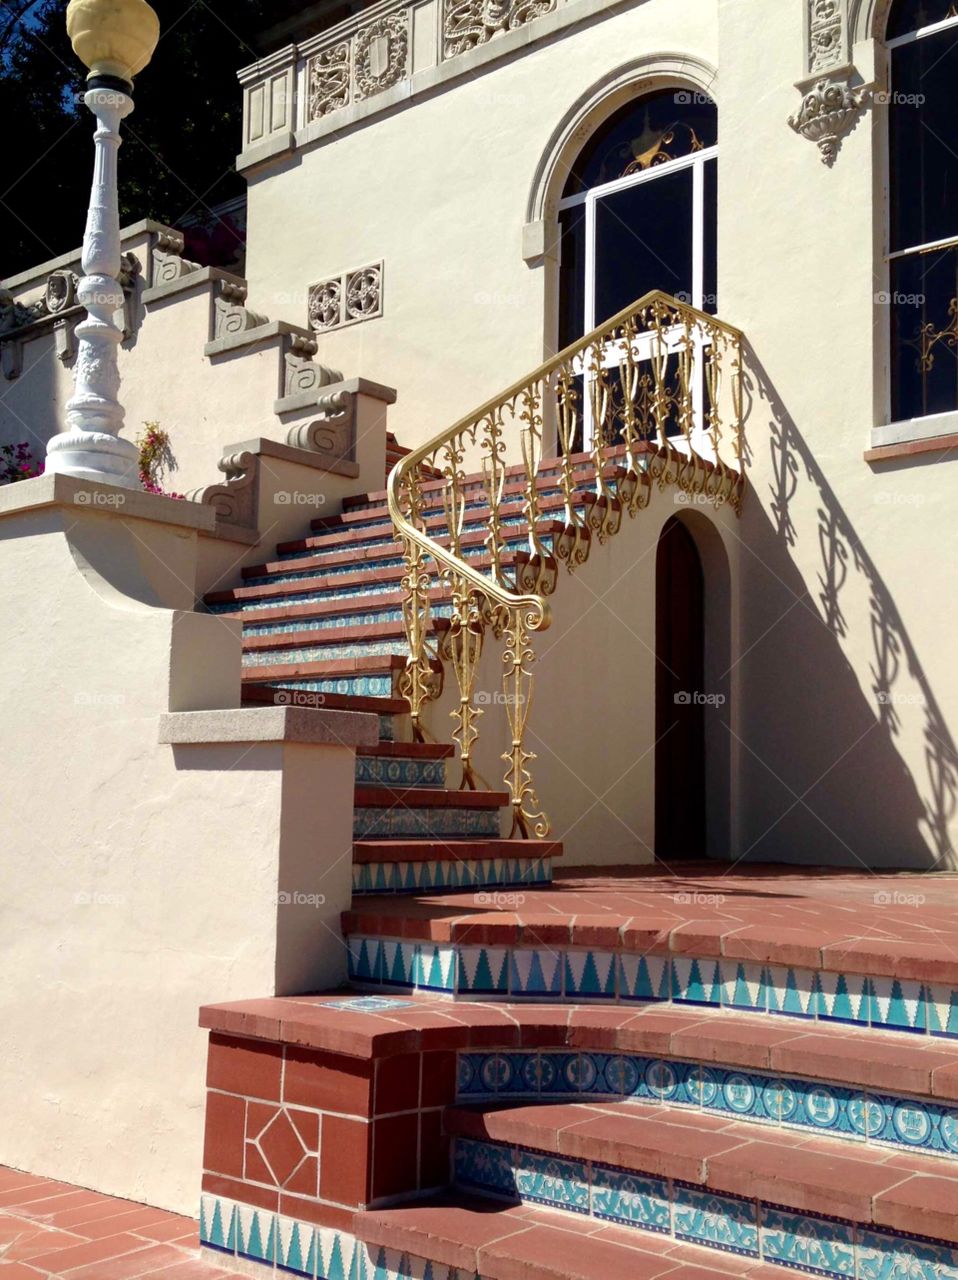 Outdoor Stairs, Hearst Castle. Outdoor stairway at Hearst Castle in San Simeon, California